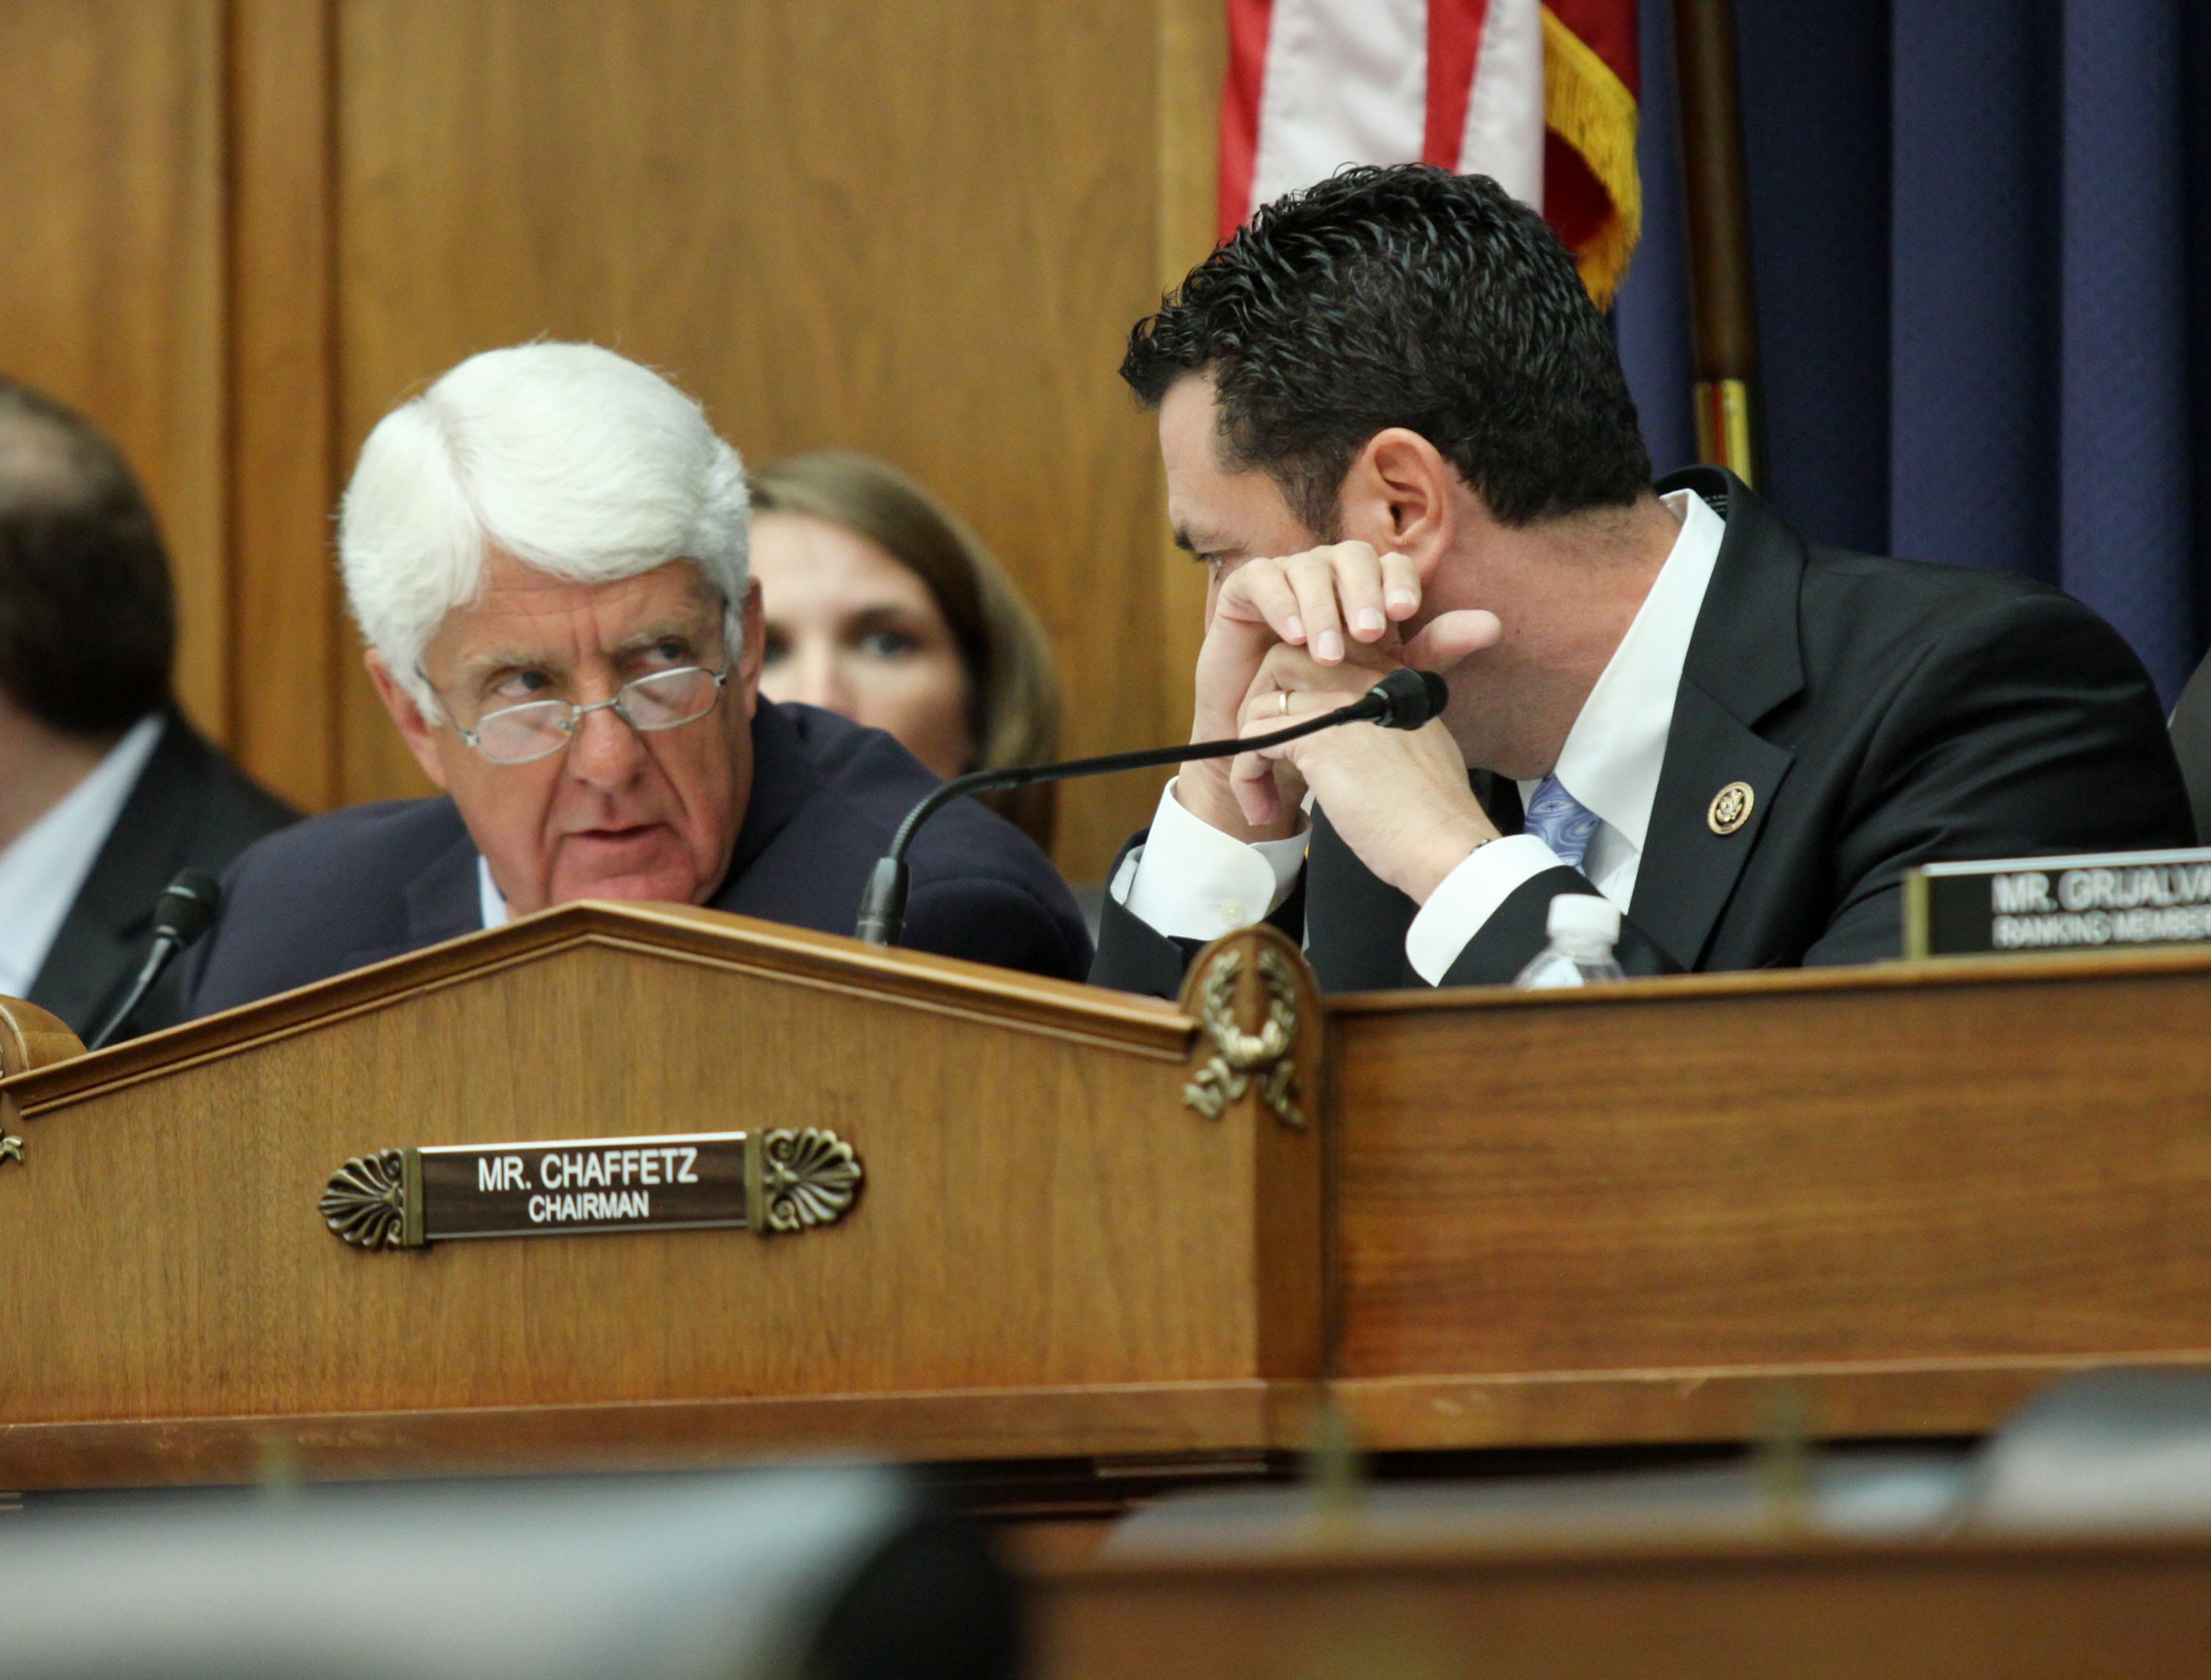 House Oversight and Government Reform Committee Chairman Rep. Jason Chaffetz, R-Utah, right, speaks to House Natural Resources Committee Chairman Rep. Rob Bishop, R-Utah, on Capitol Hill in Washington on Thursday, during a joint Oversight and Reform Committee-Natural Resources Committee hearing on the Gold King mine spill.